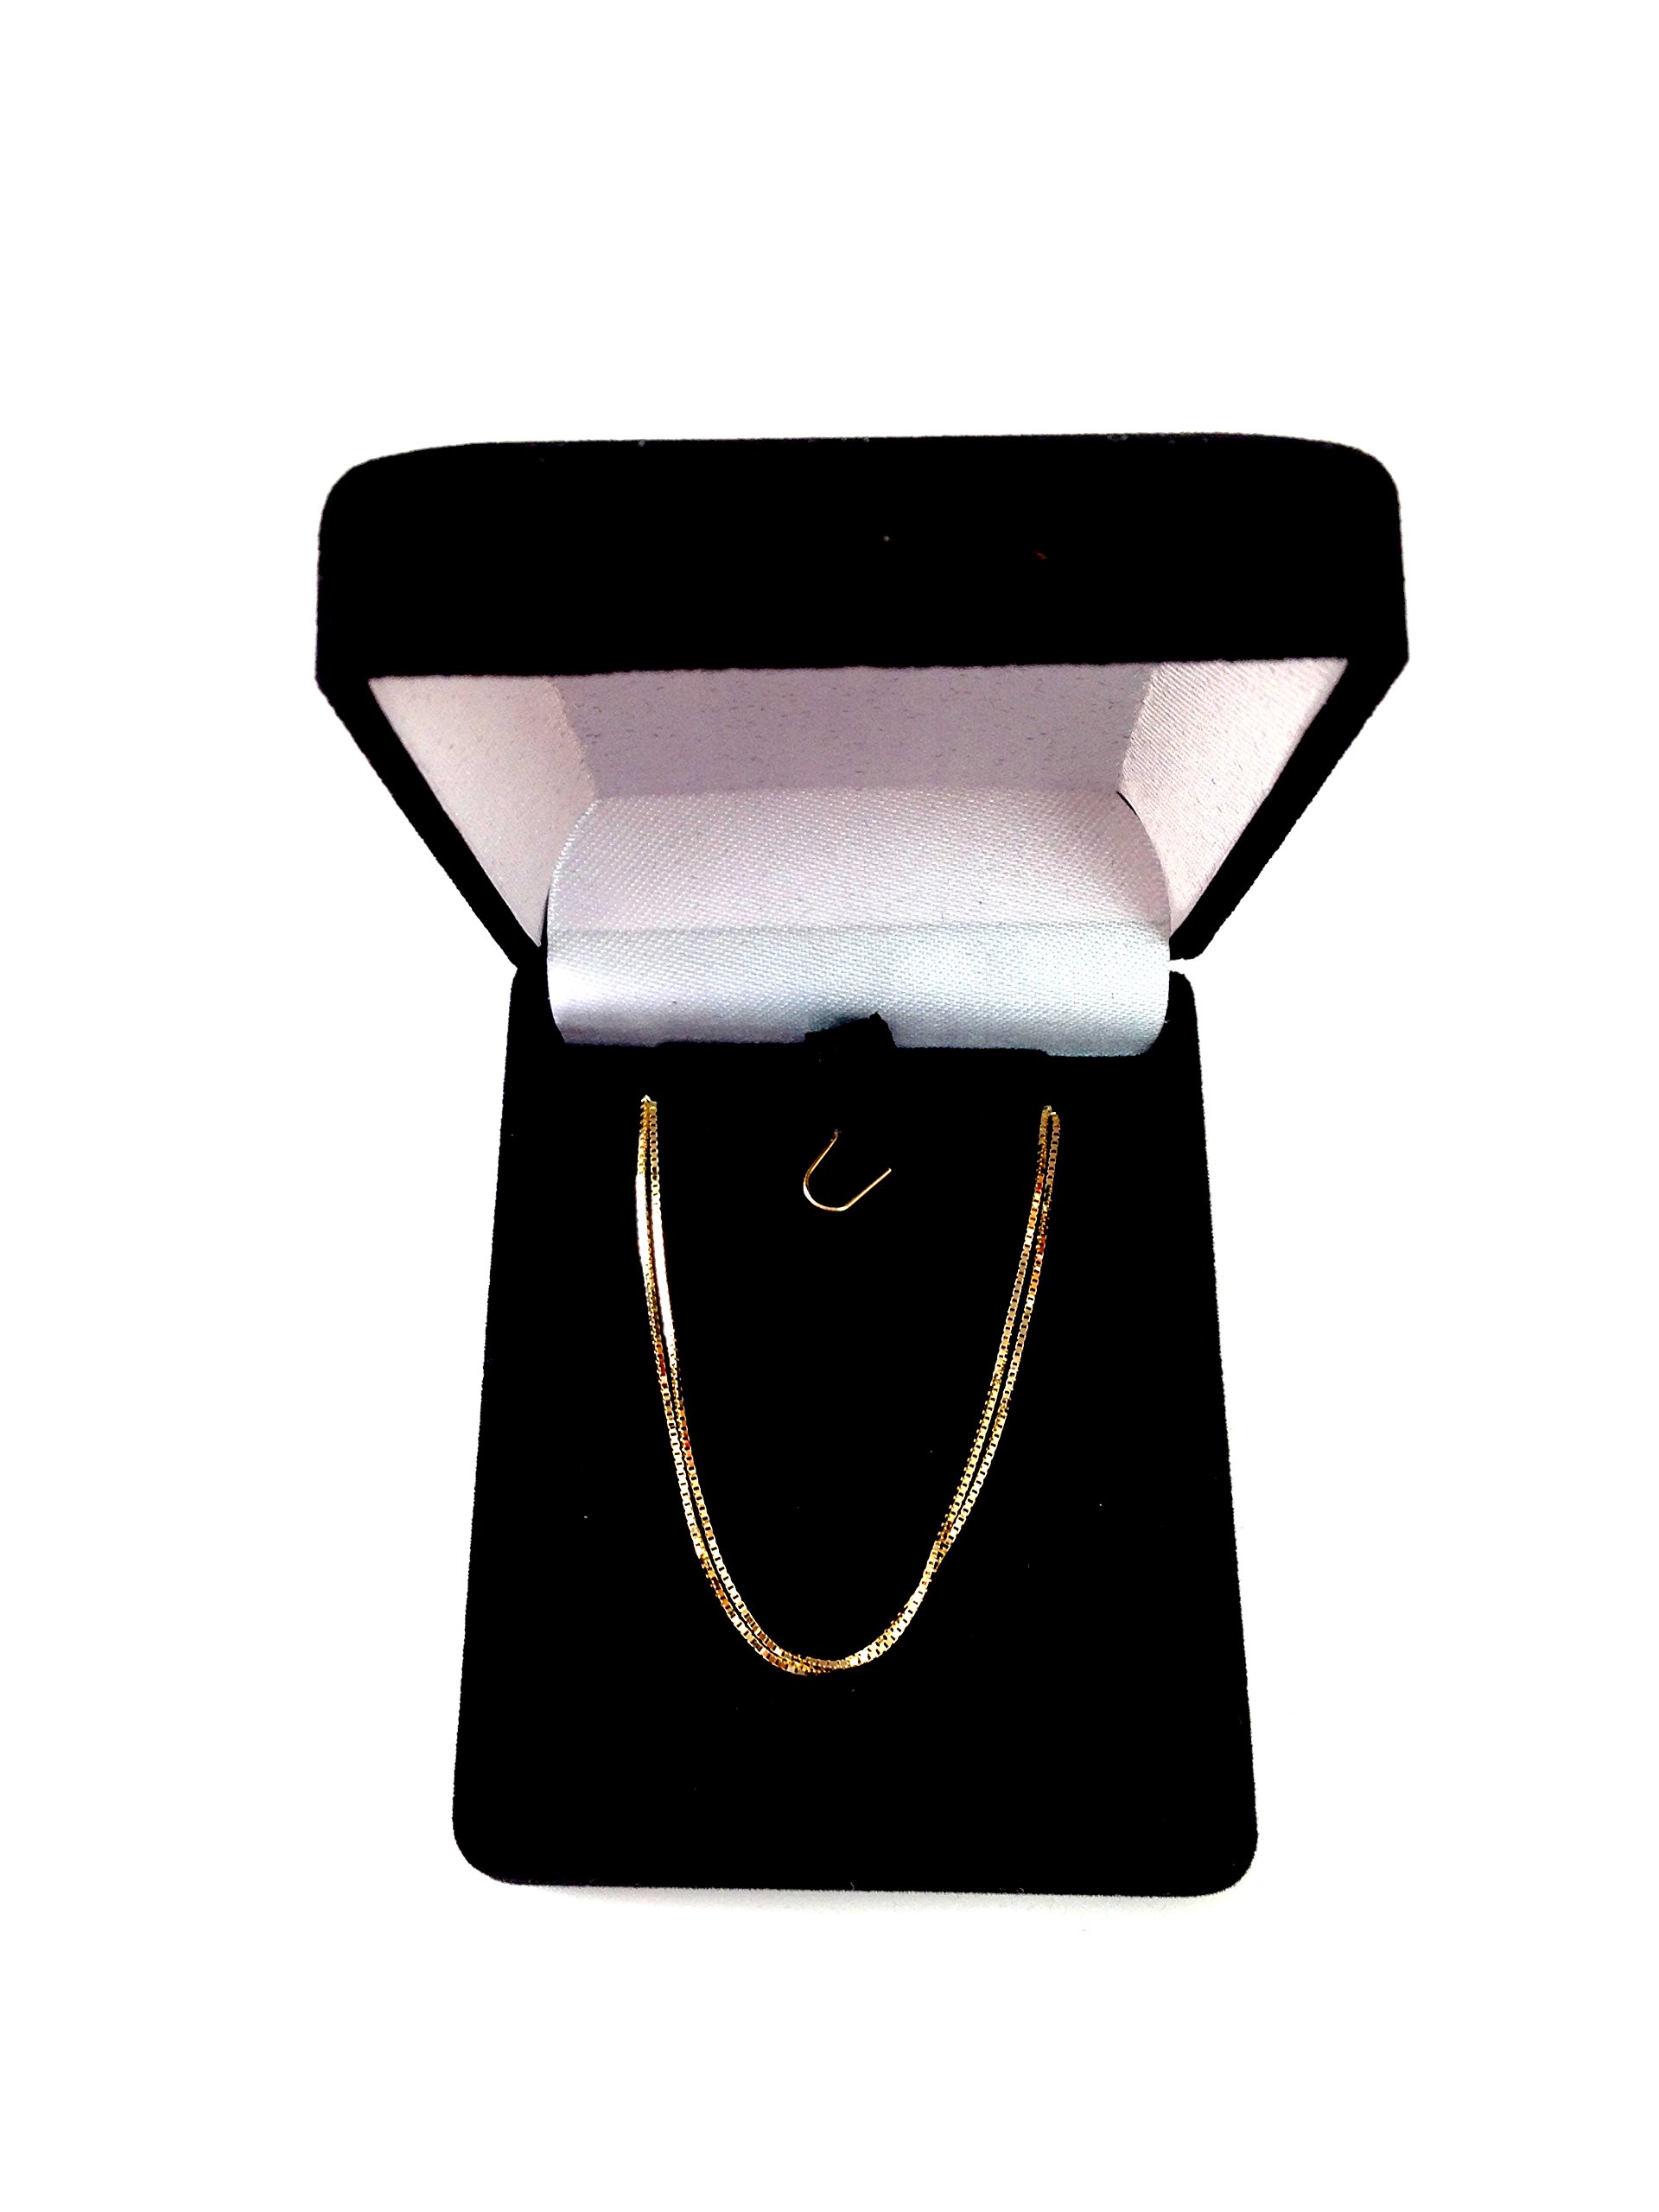 Jewelry Affairs 14k Yellow Solid Gold Mirror Box Chain Necklace, 0.7mm